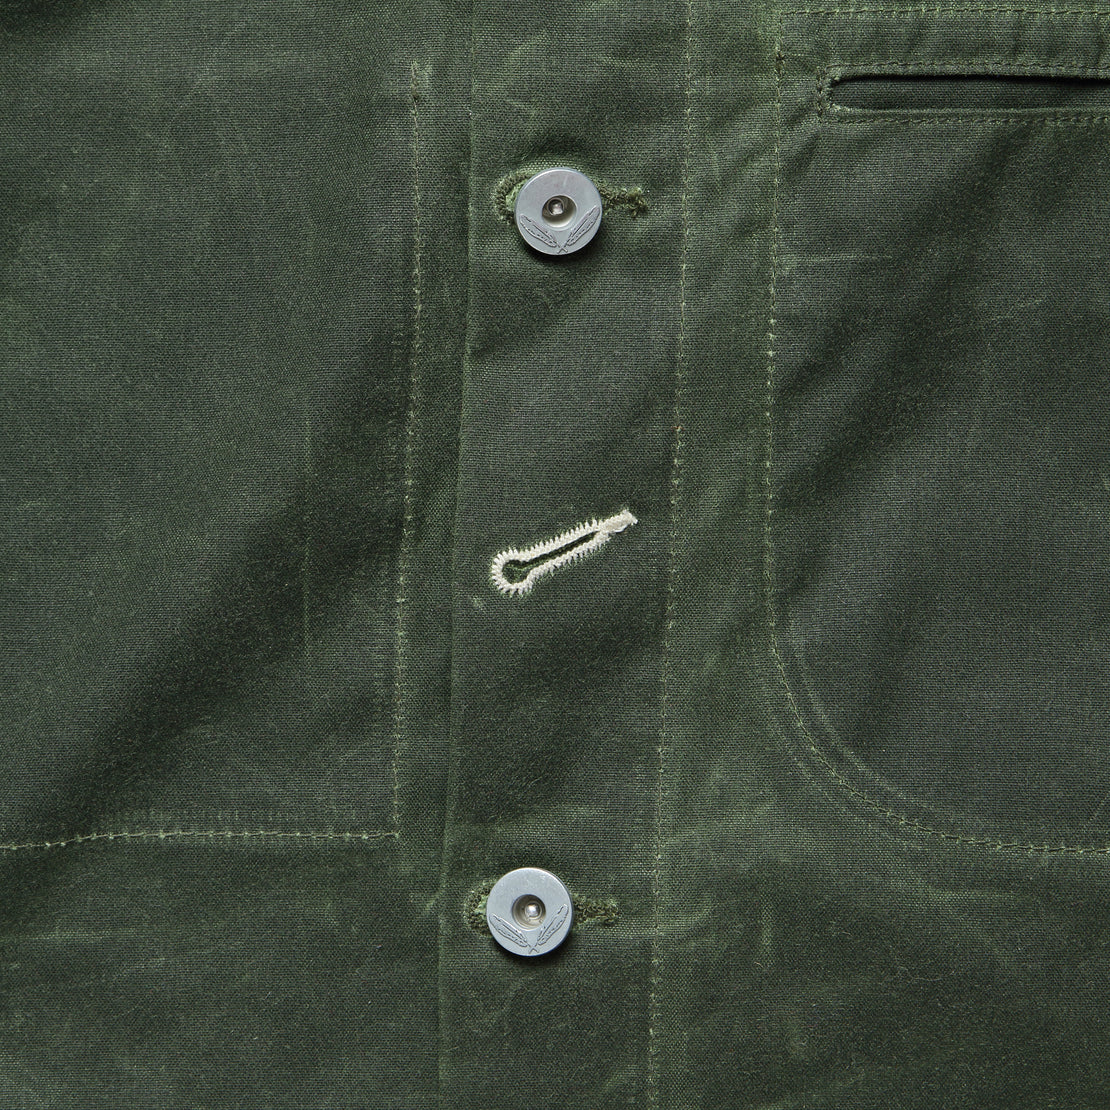 Supply Jacket - Waxed Olive Ridgeline - Rogue Territory - STAG Provisions - Outerwear - Coat / Jacket